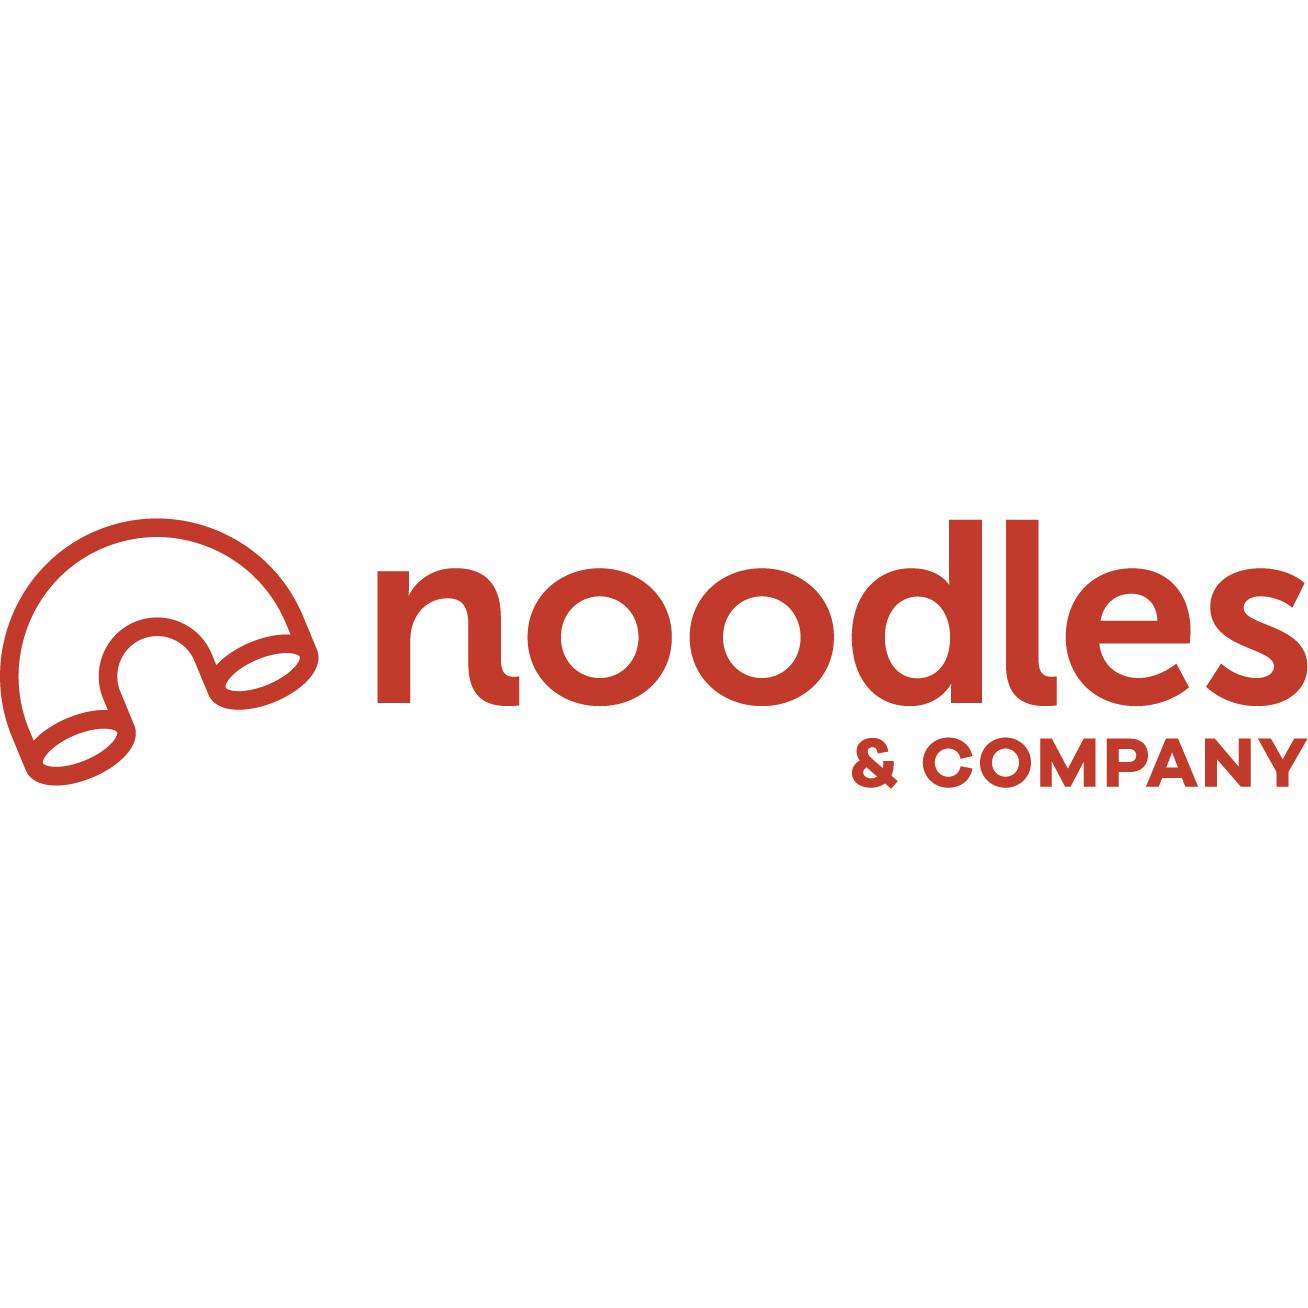 Noodles & Company - Waterloo Menu and Delivery in Waterloo IA, 50702